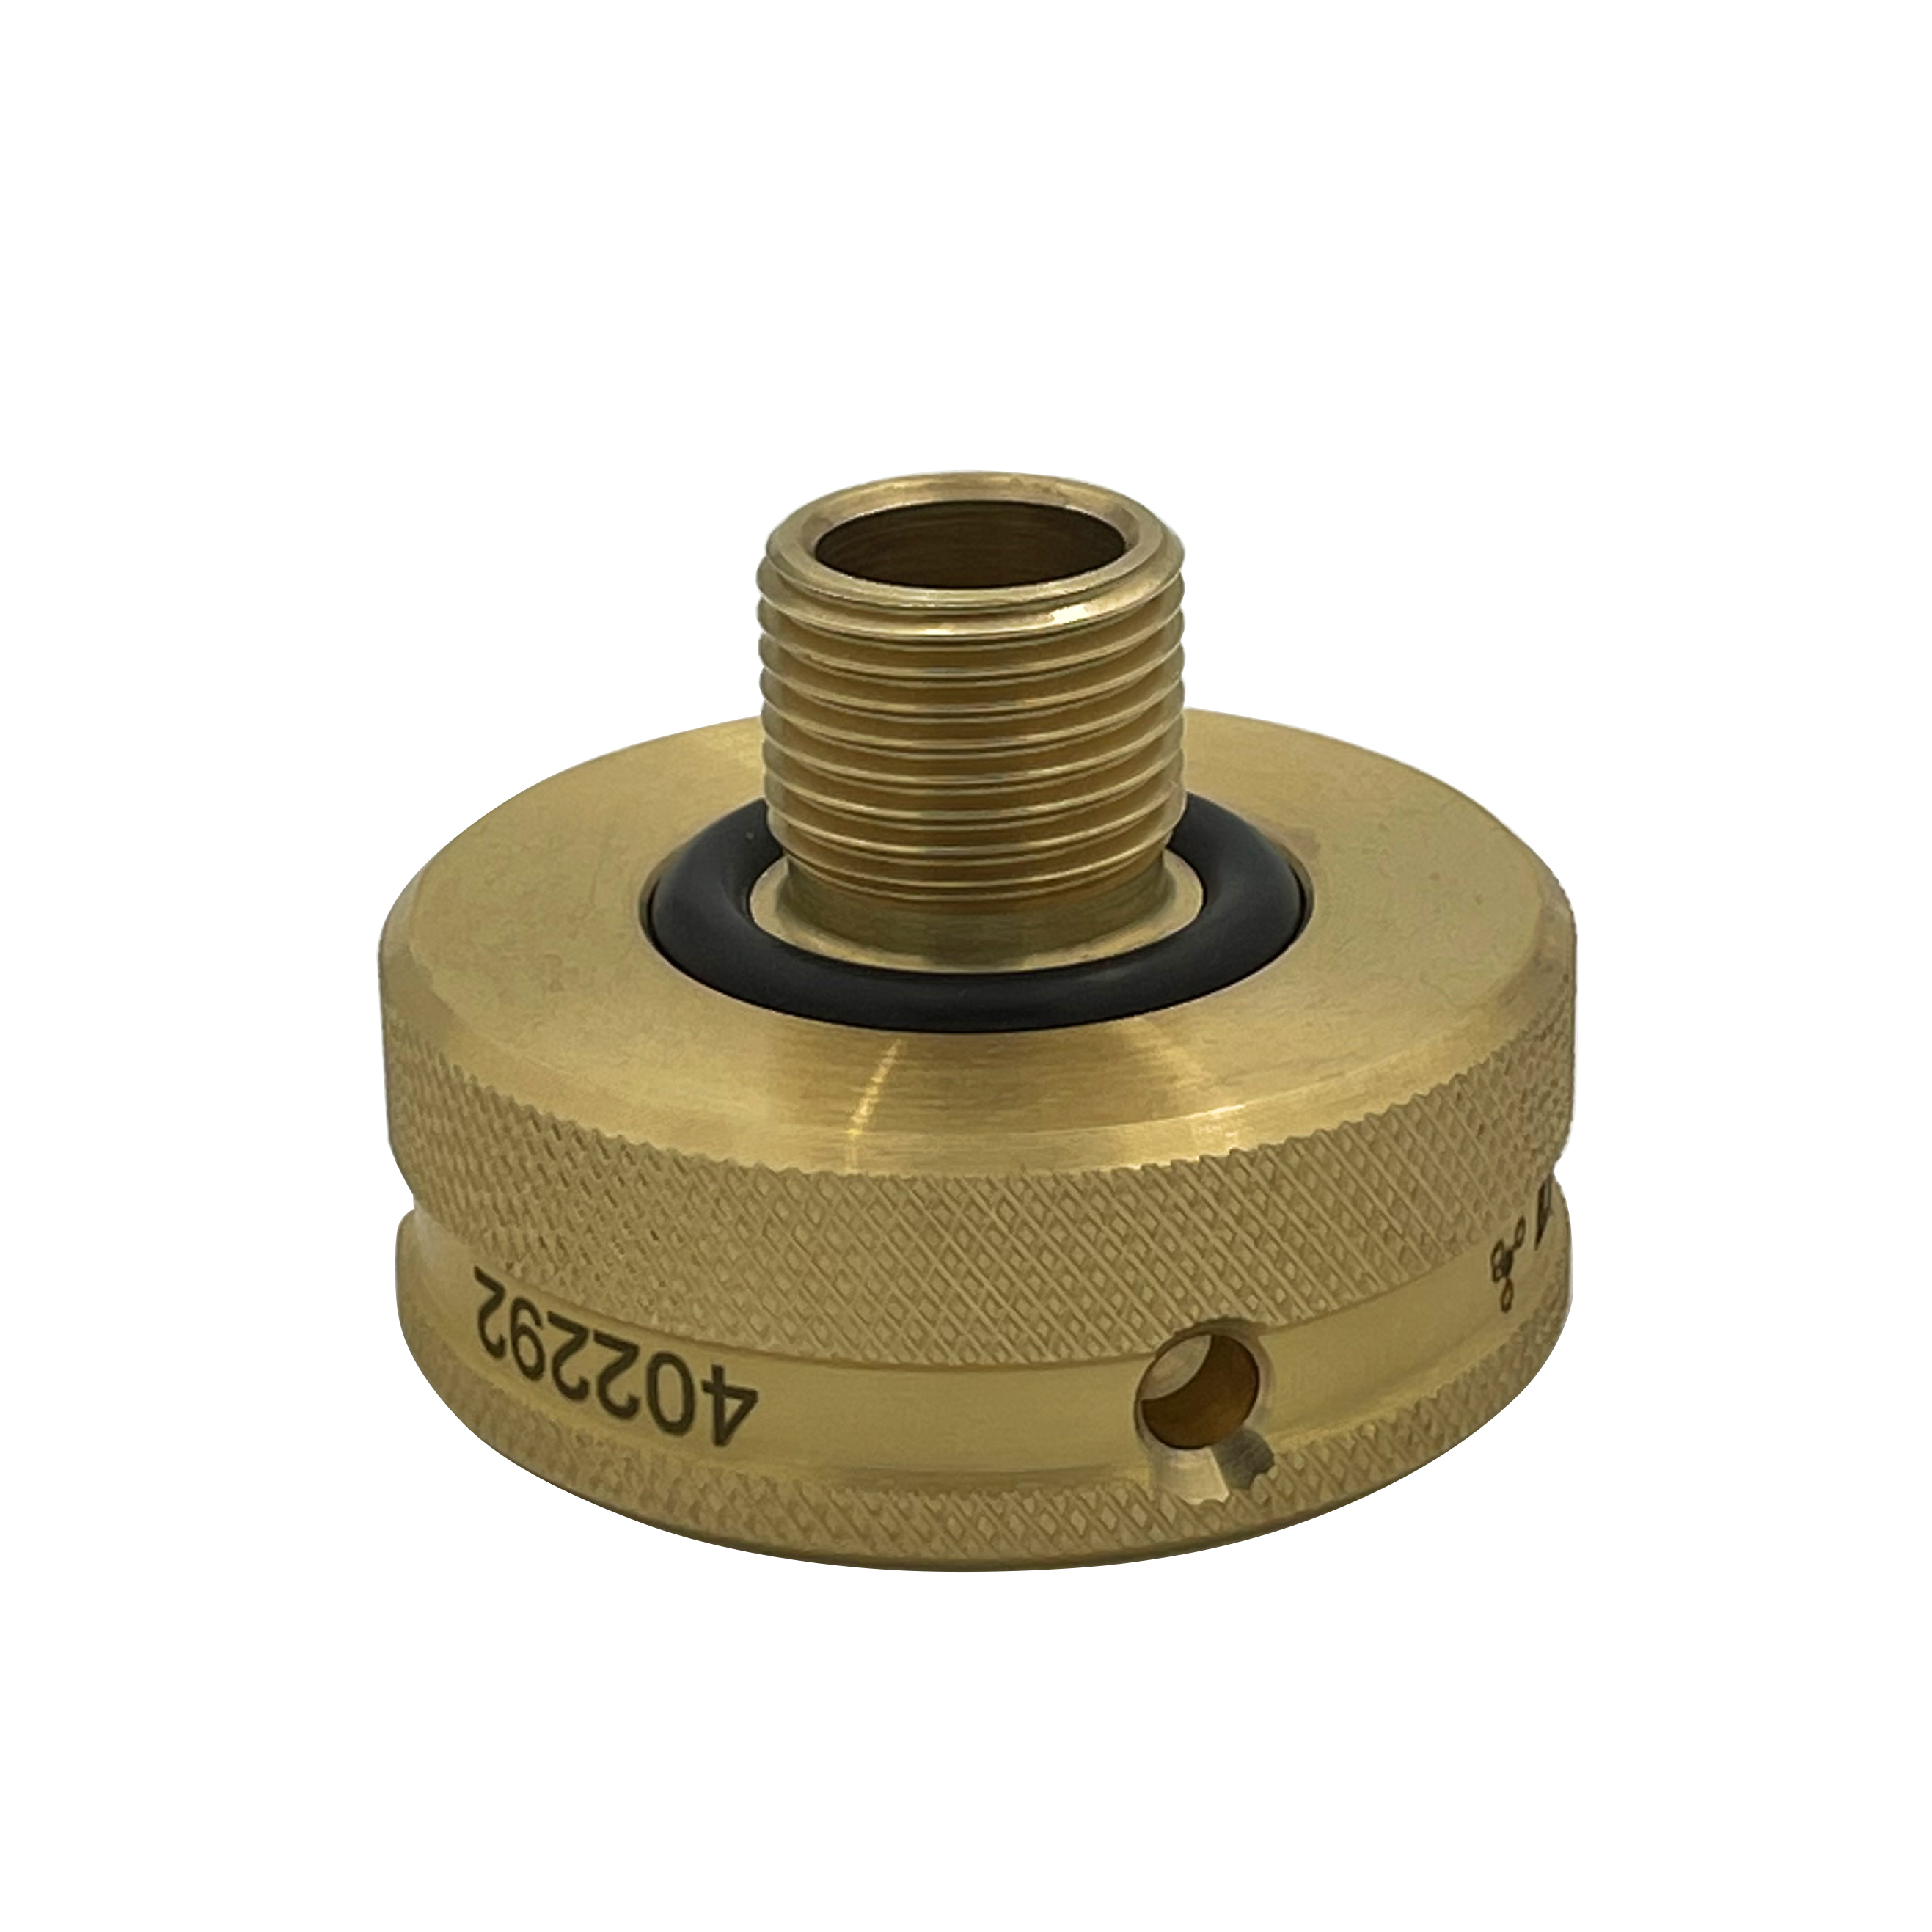 Adapter 1 inch IT to G 1/2 inch ET brass